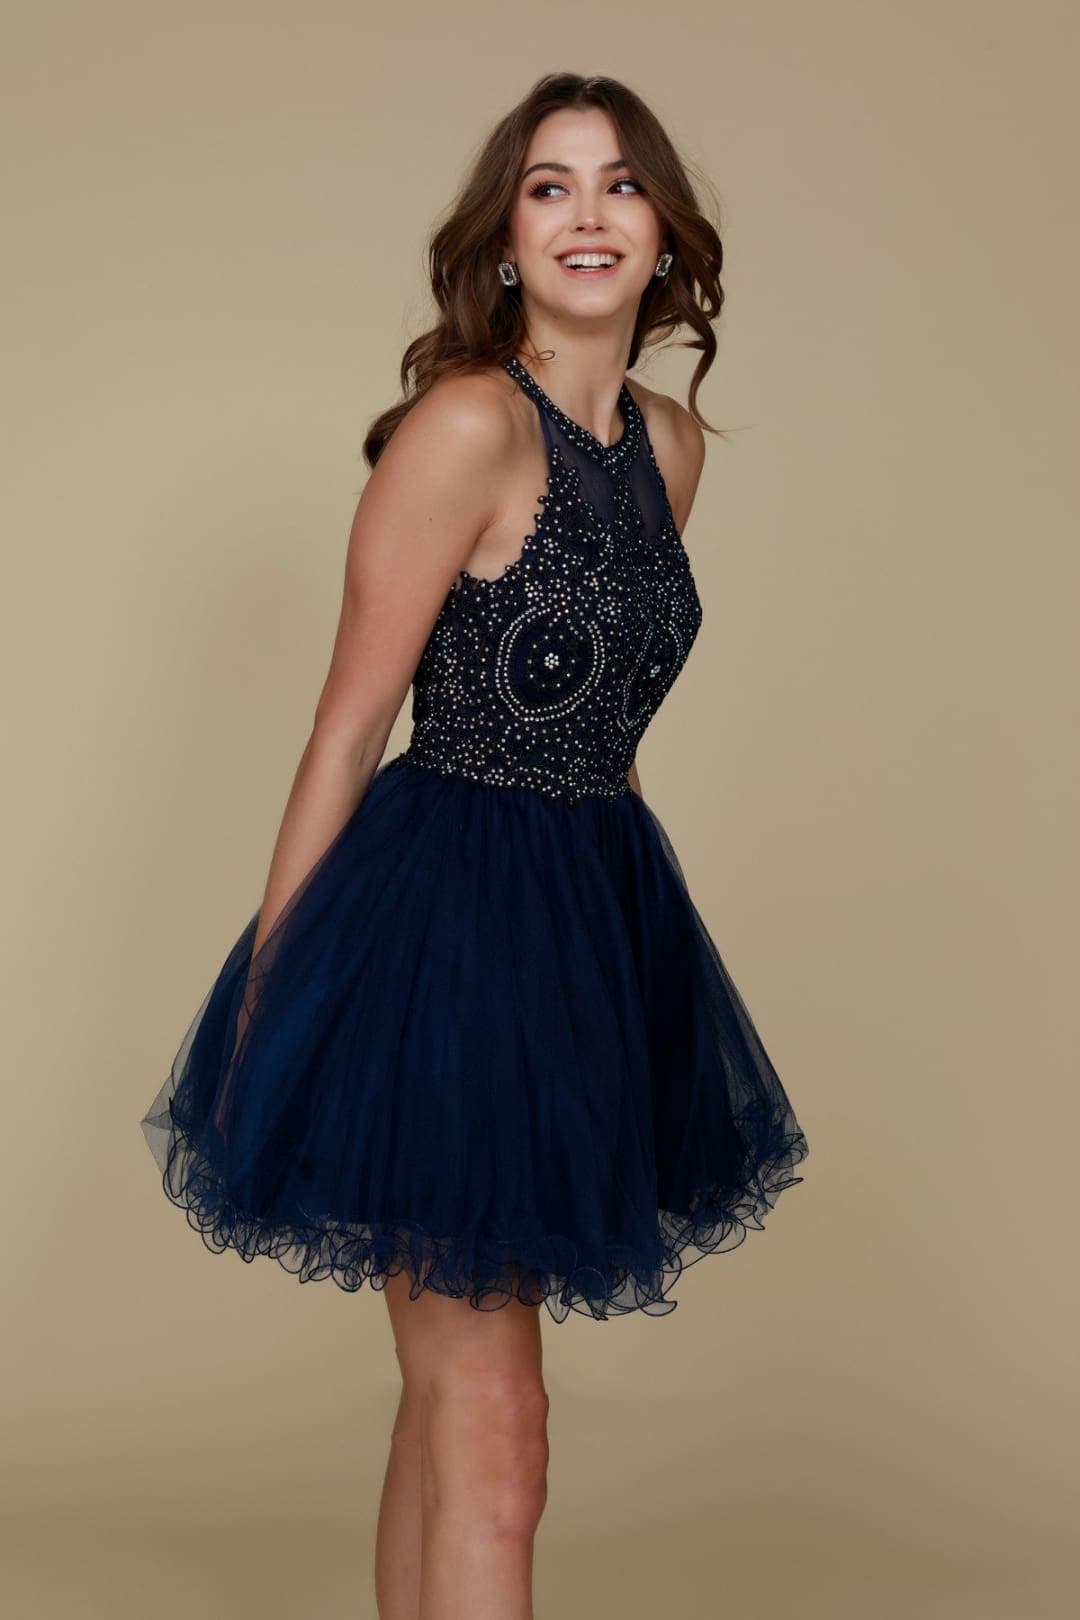 Nox Anabel B652 Halter Lace Applique Homecoming Cocktail Dress - NAVY BLUE / XS - Dress